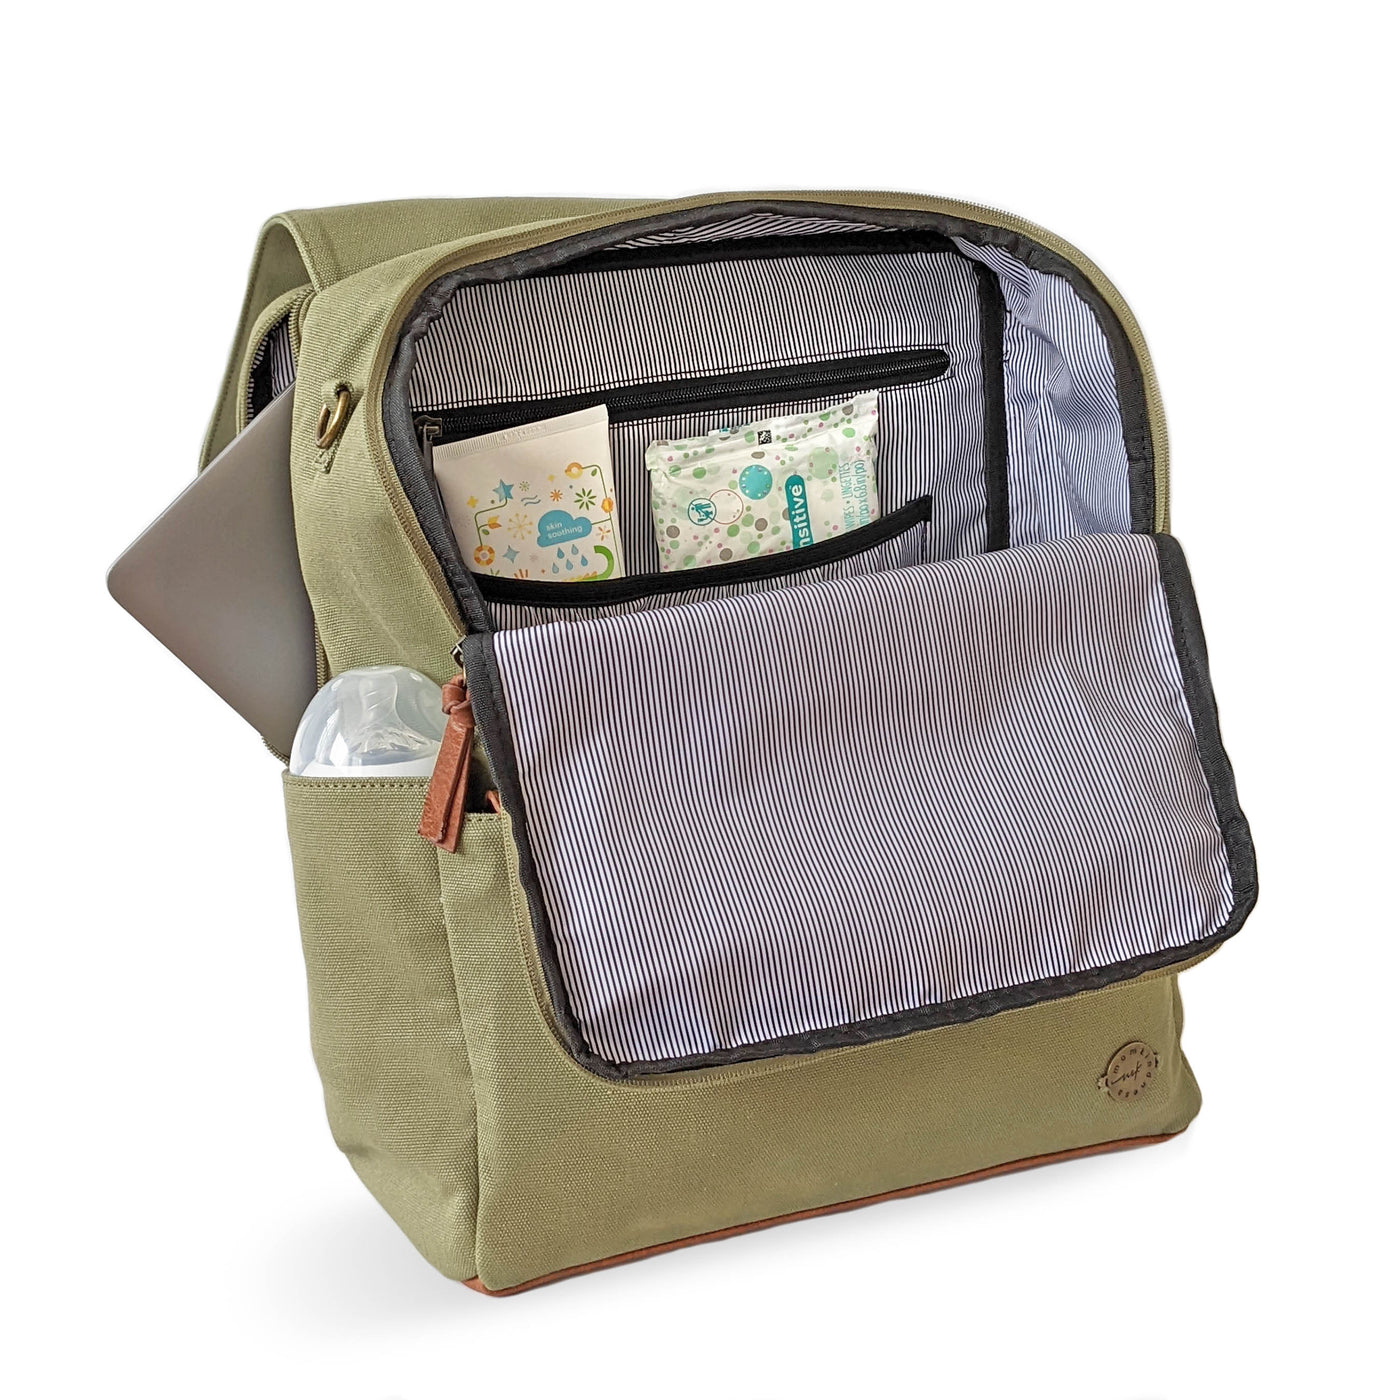 A laurel green colored canvas backpack diaper bag with caramel brown vegan leather accents, shown in 3/4 front view with the main compartment open to reveal interior pockets and striped lining, also with a baby bottle in side pocket.  